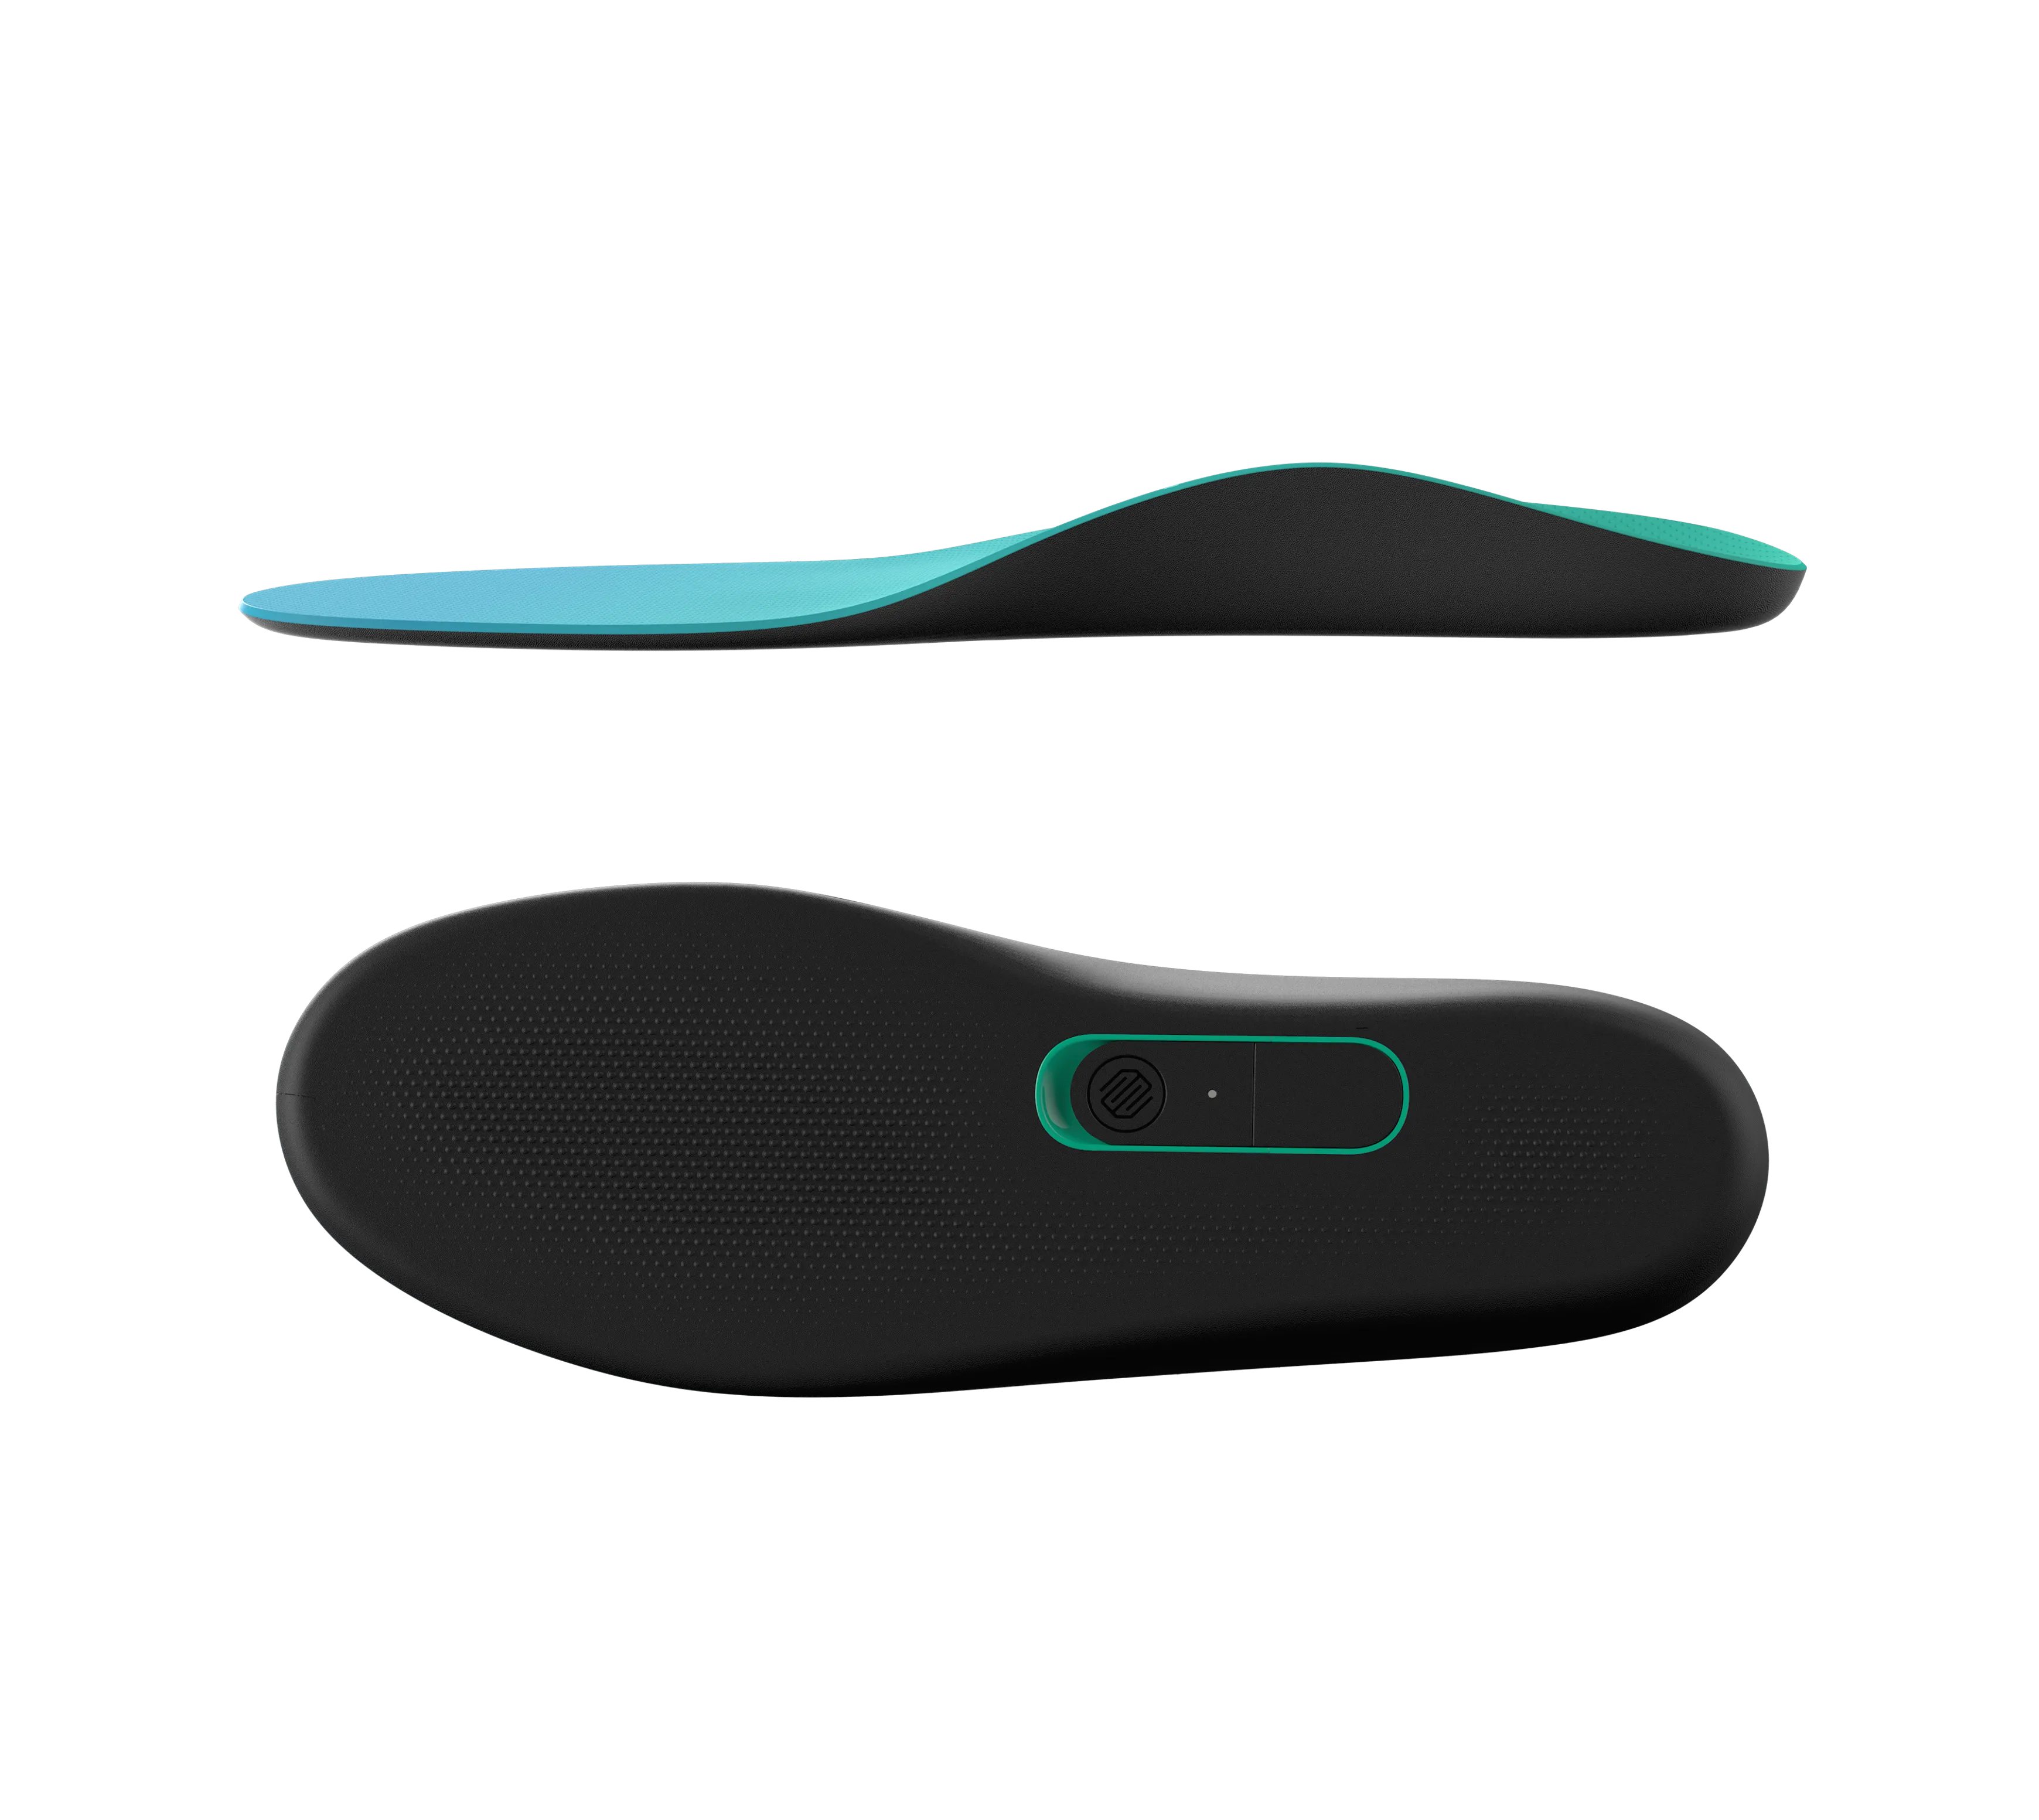 Side and top view of the Runvi smart insole in front of a transparent background